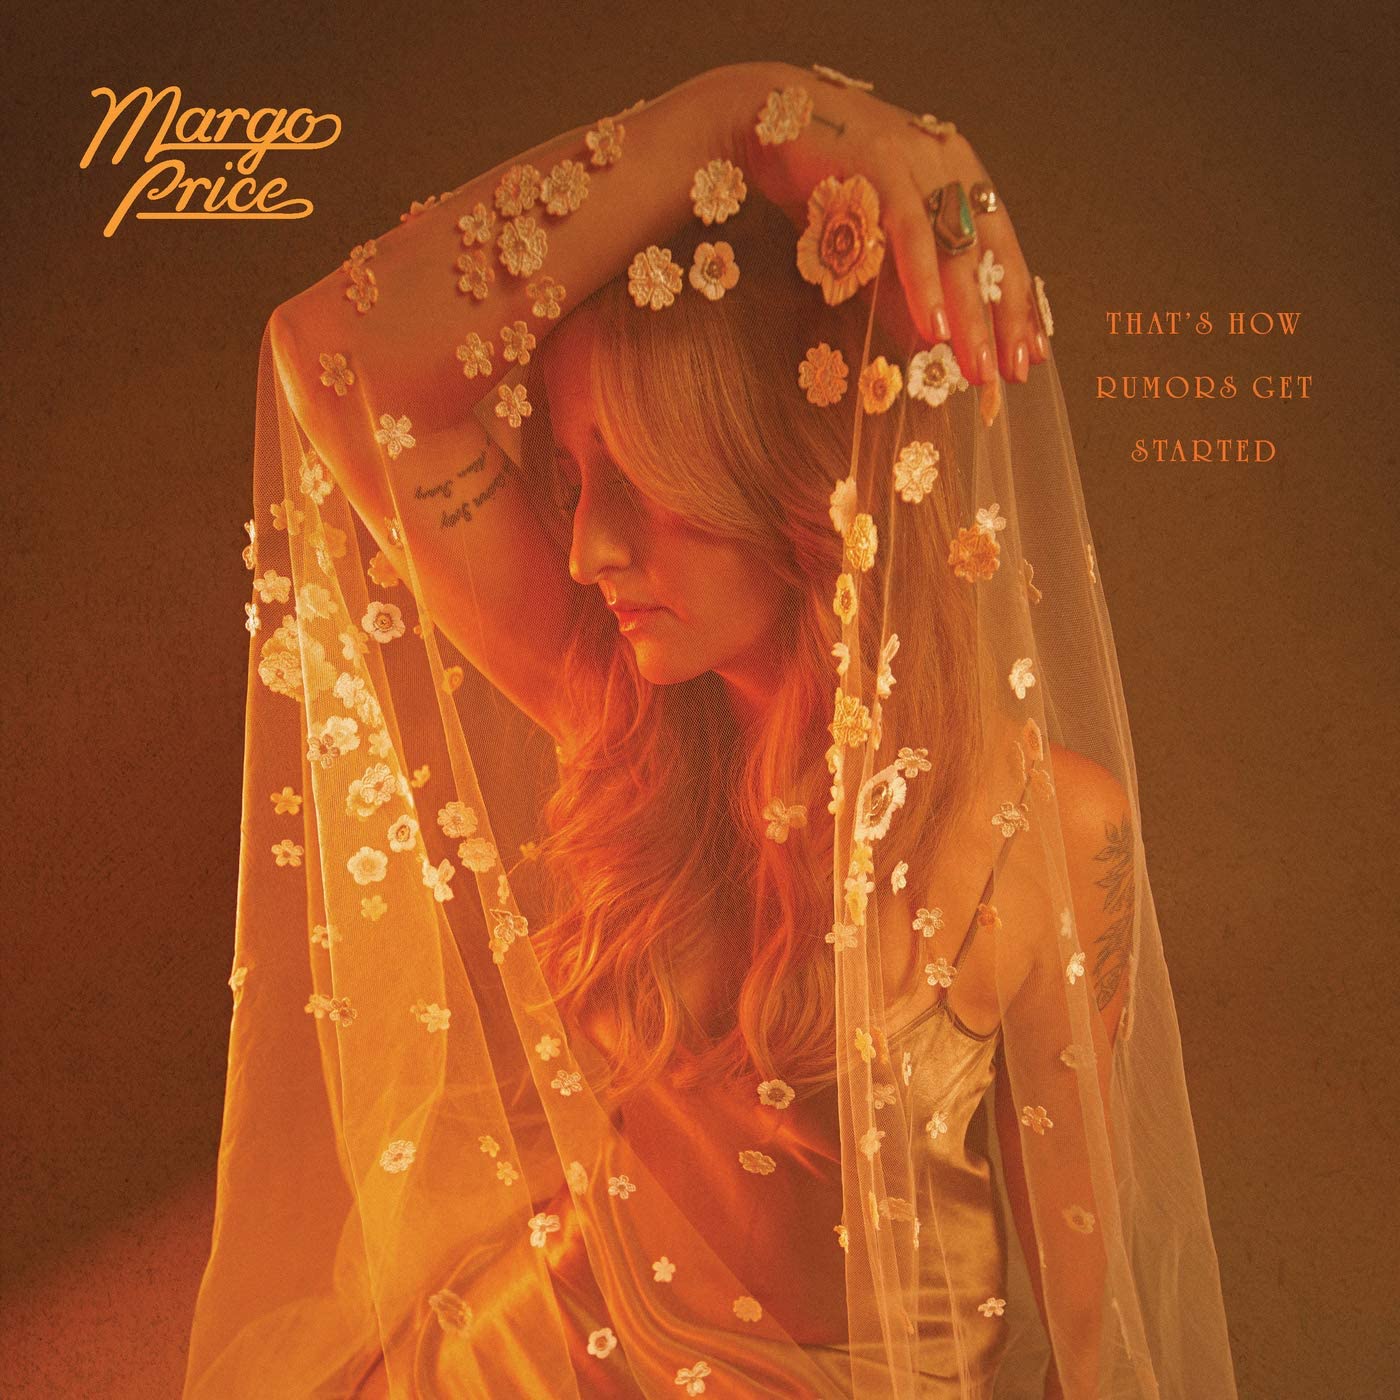 Margo Price - That's How Rumours Get Started - CD